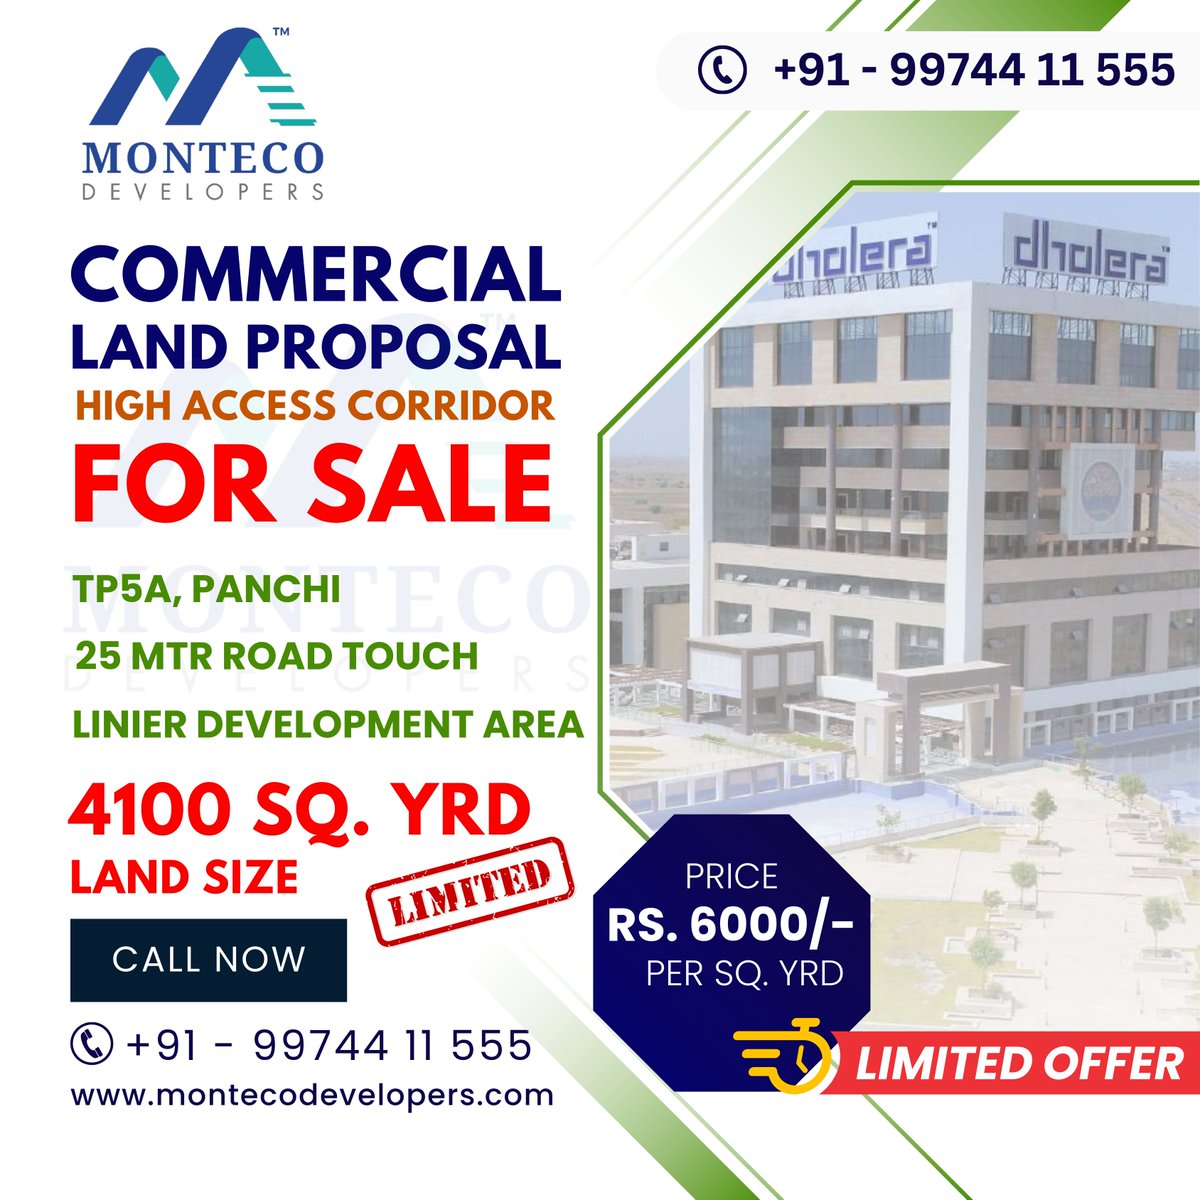 #CommercialLand #DholeraSmartCity #AvailableNow
𝗙𝗼𝗿 𝗠𝗼𝗿𝗲 𝗜𝗻𝗳𝗼𝗿𝗺𝗮𝘁𝗶𝗼𝗻 𝗖𝗮𝗹𝗹: 𝟵𝟵𝟳𝟰𝟰𝟭𝟭𝟱𝟱𝟱
#MontecoDevelopers #DholeraSIR #LandInvestment #RealEstate #CommercialLand #ResidentialLand #IndustrialLand #InvestWithConfidence #Dholera #DICDL #ThinkSmart